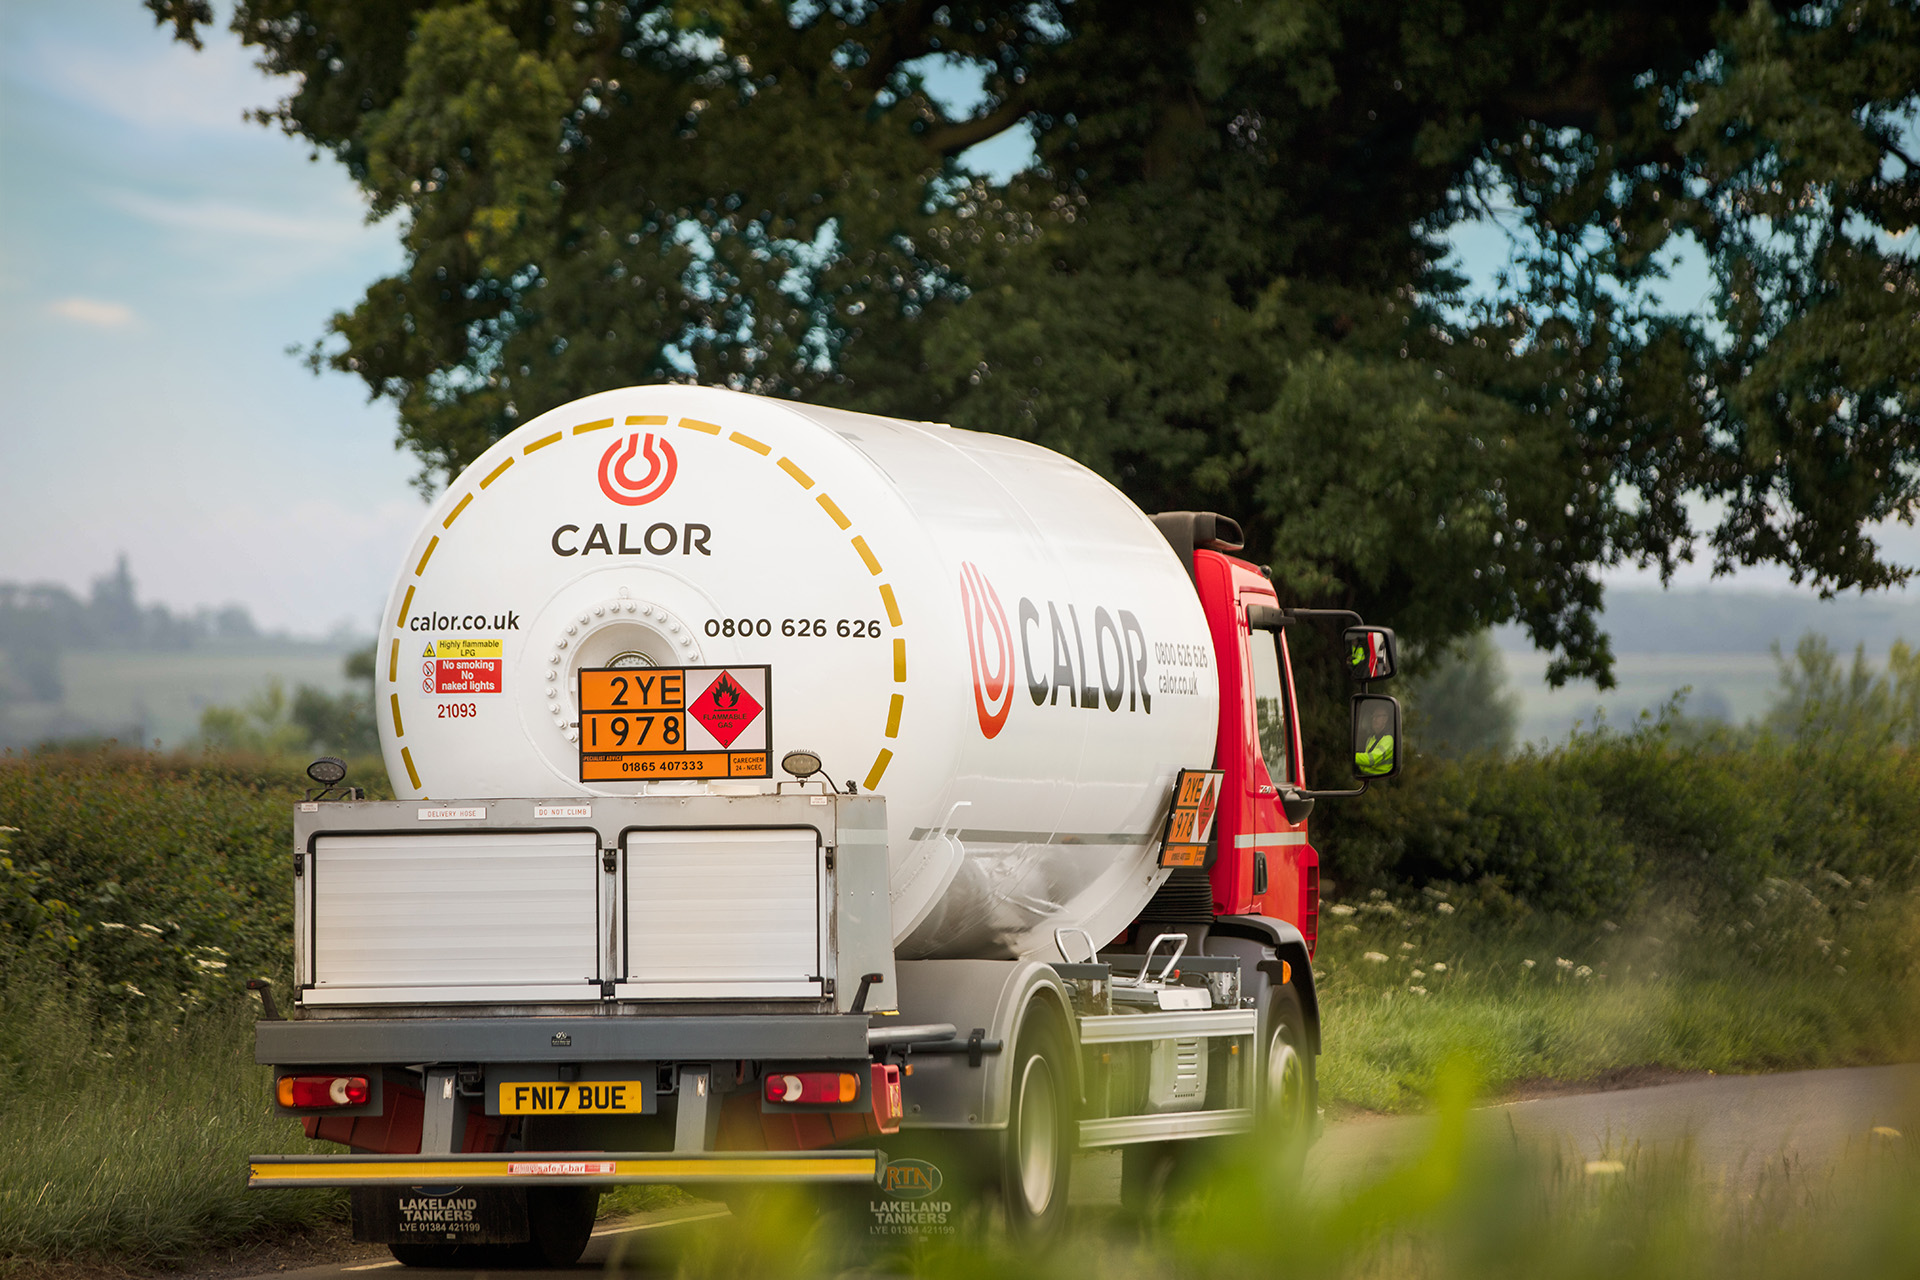 An angled rear view of a Calor lorry in a rural setting